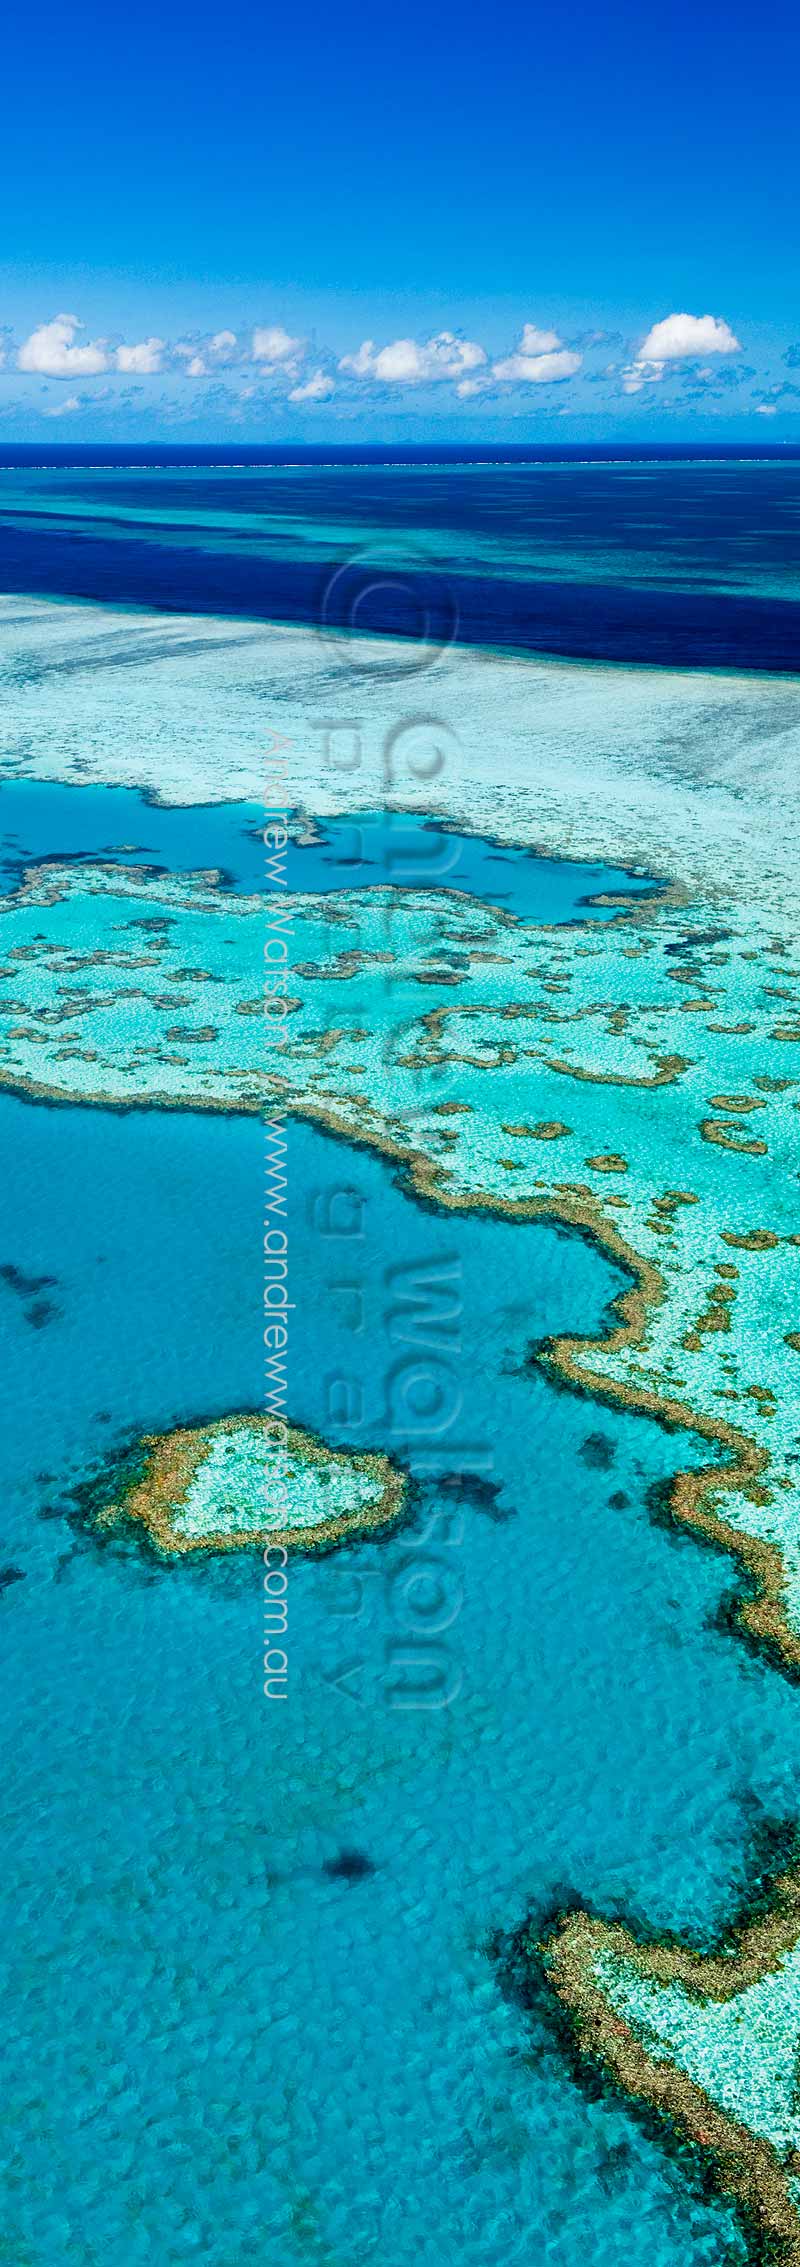 View of Heart Reef, Great Barrier ReefWhitsundays, North QueenslandImage available for licensing or as a fine-art print... please enquire